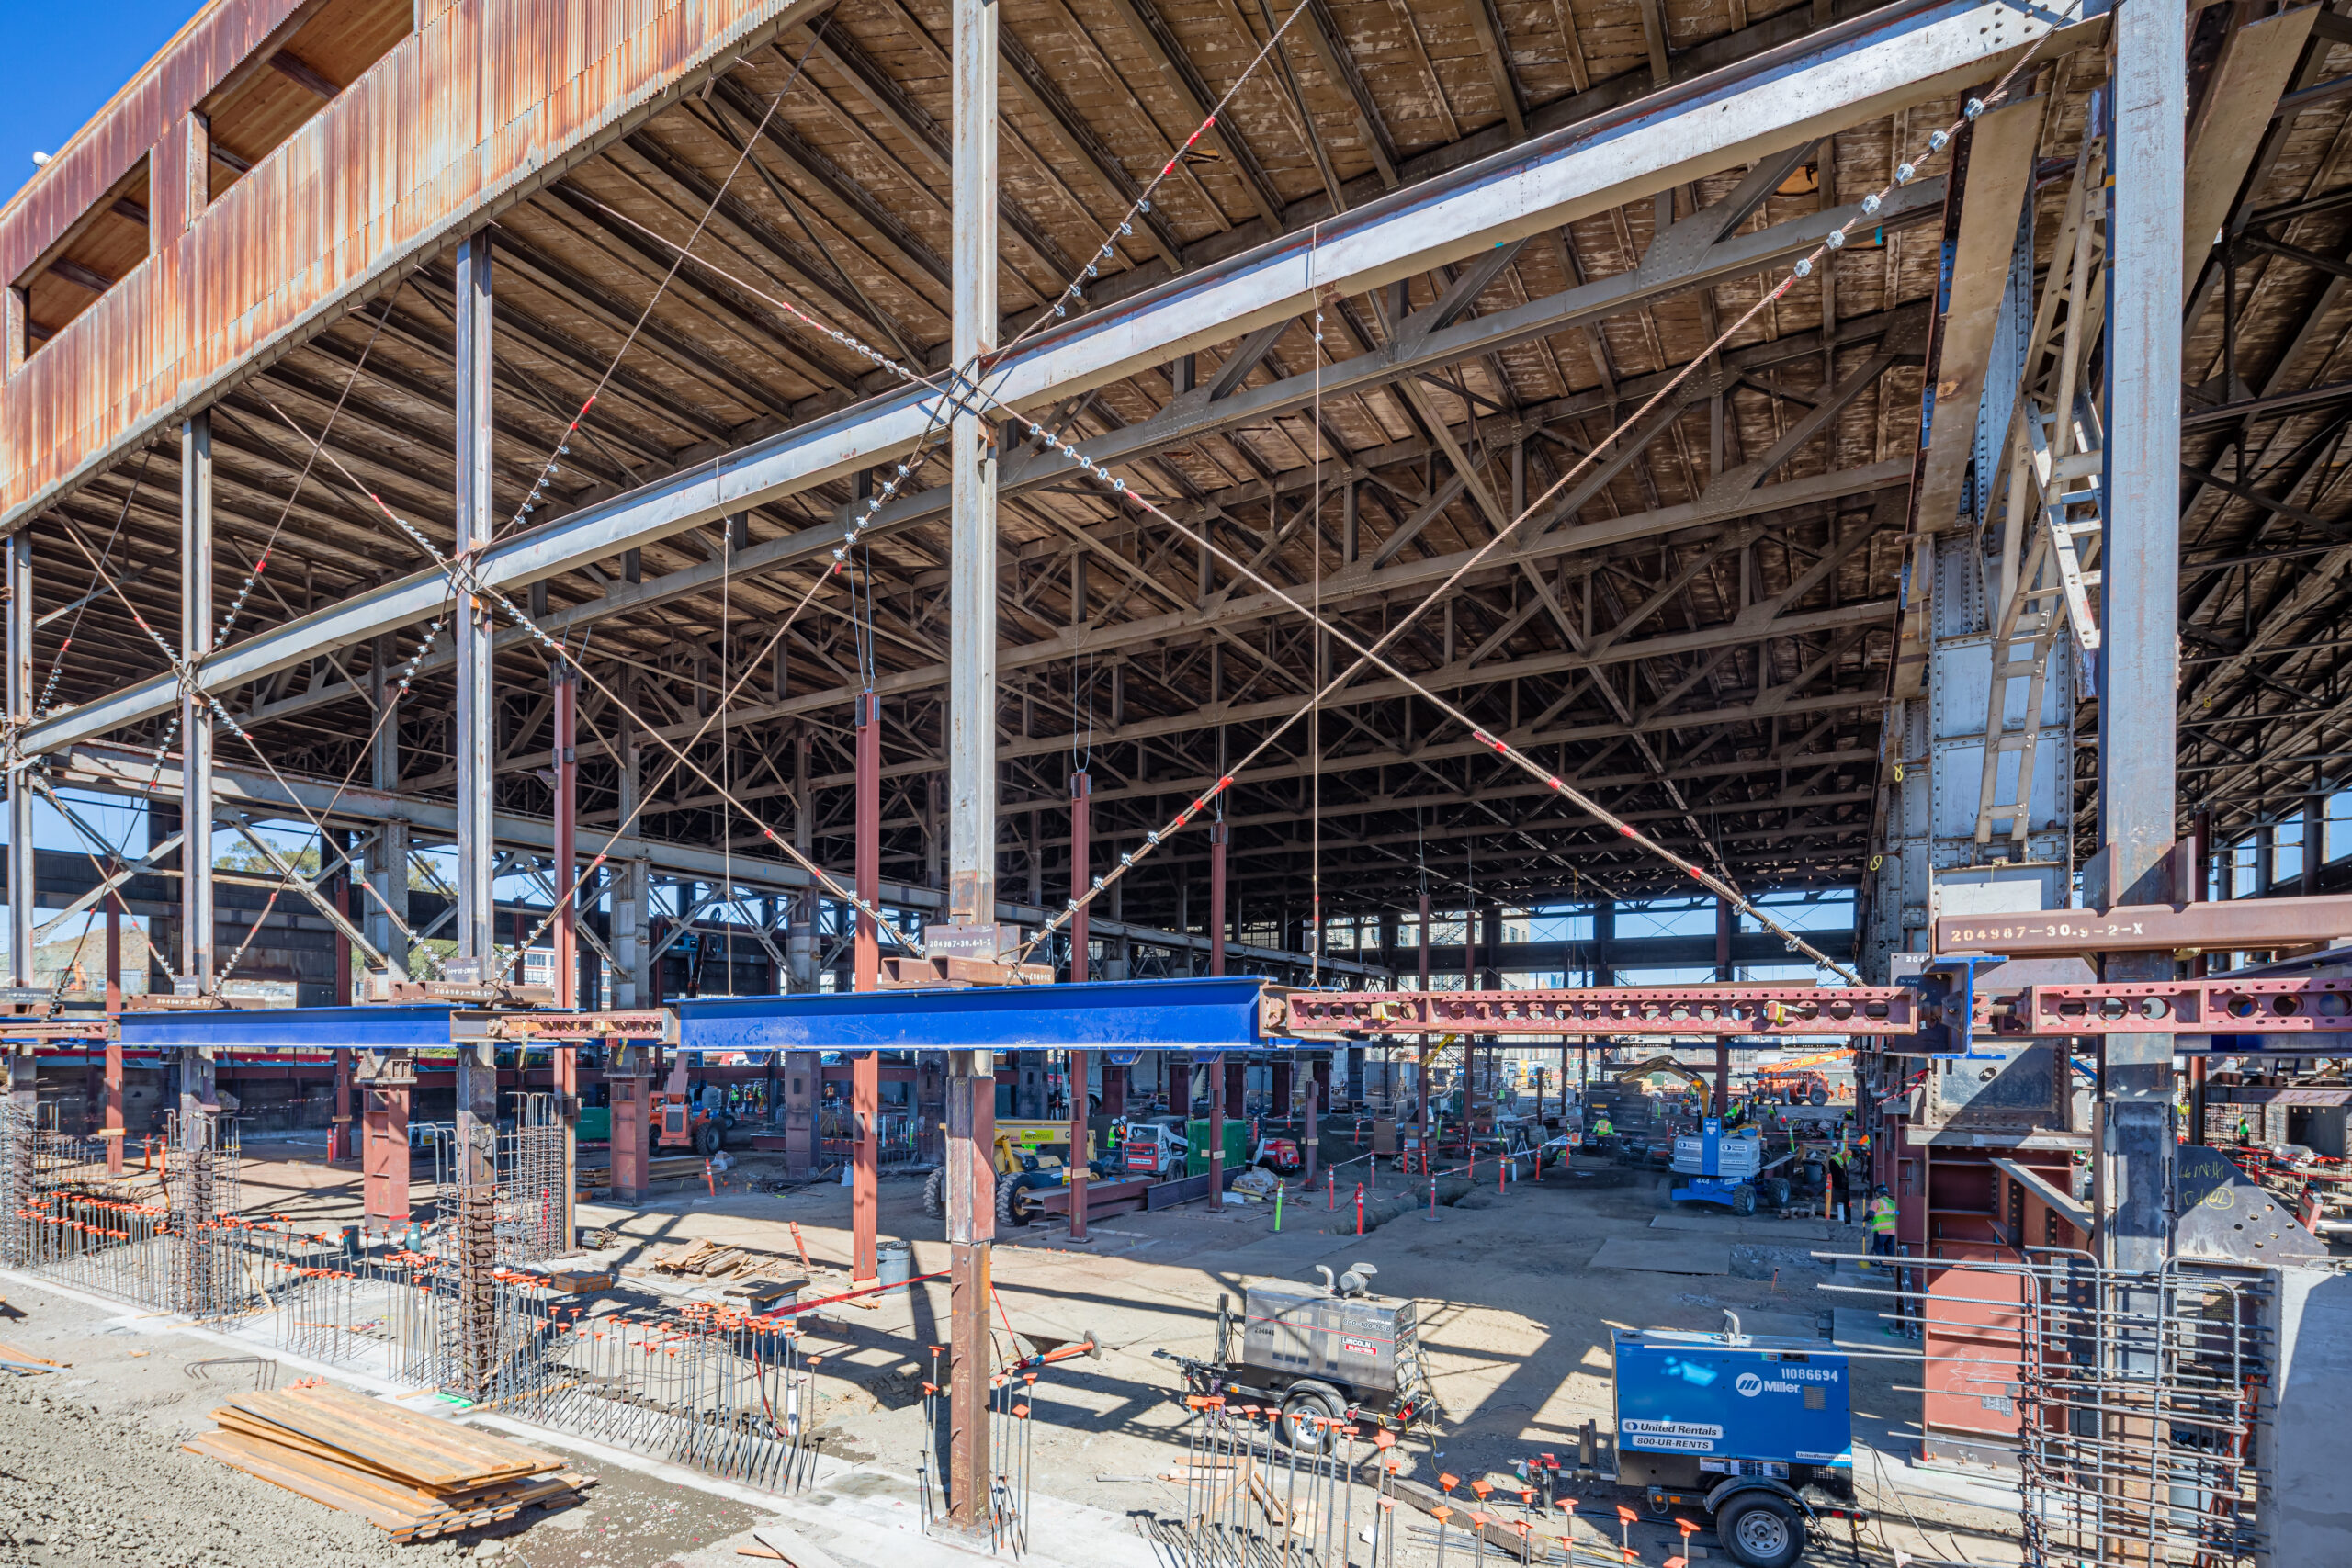 a large warehouse with many beams under construction